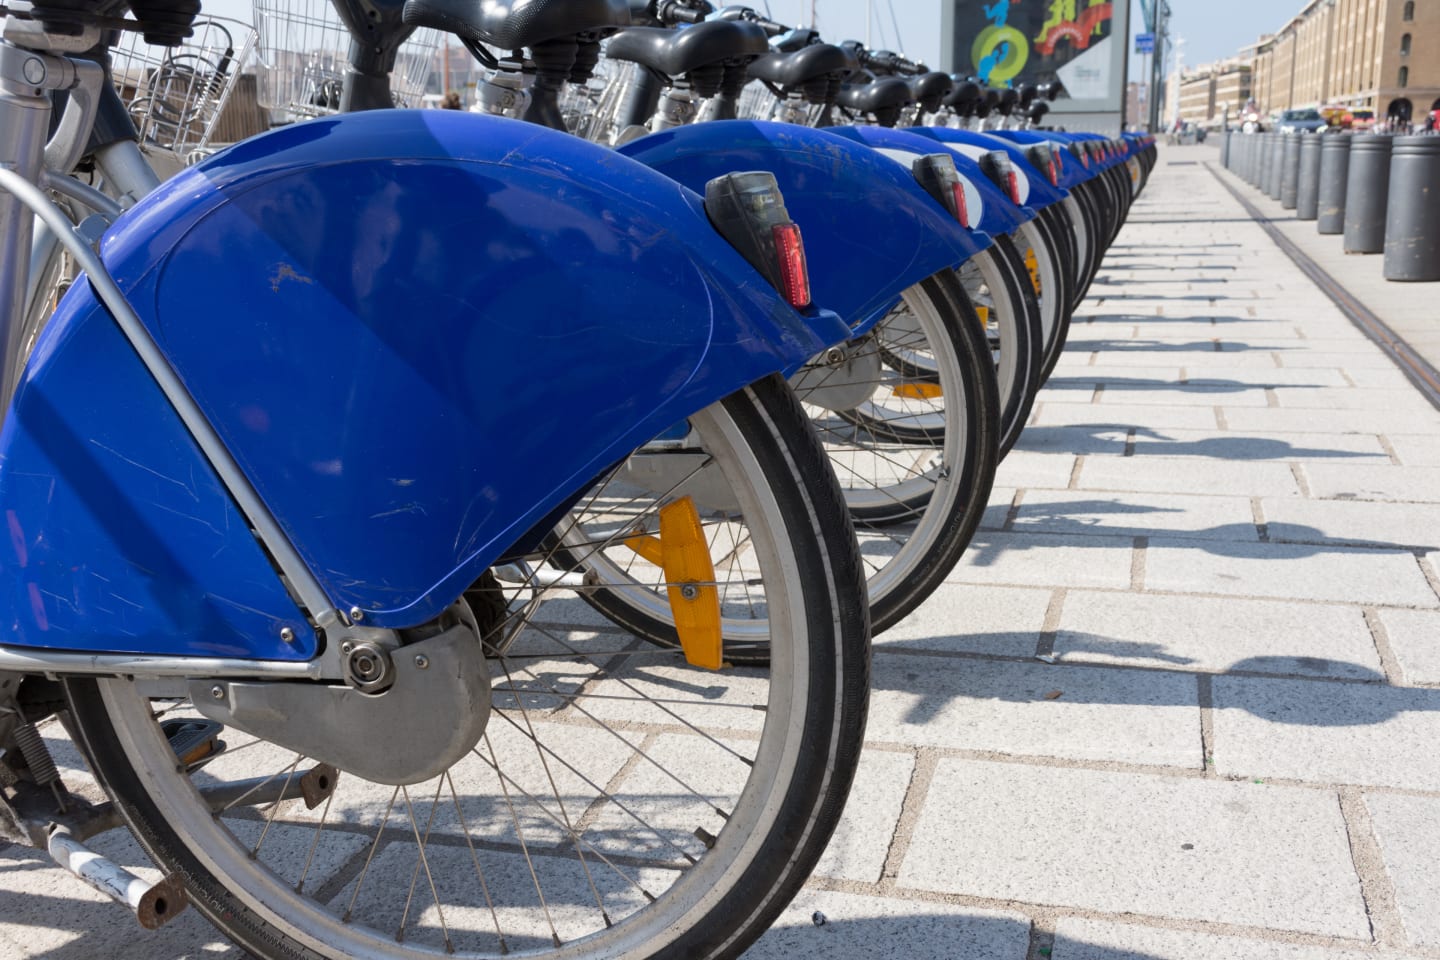 Close Up Of A Row Of Bicycles With Royal Blue And White Fenders To Rent In Vieux Port Or Old Port